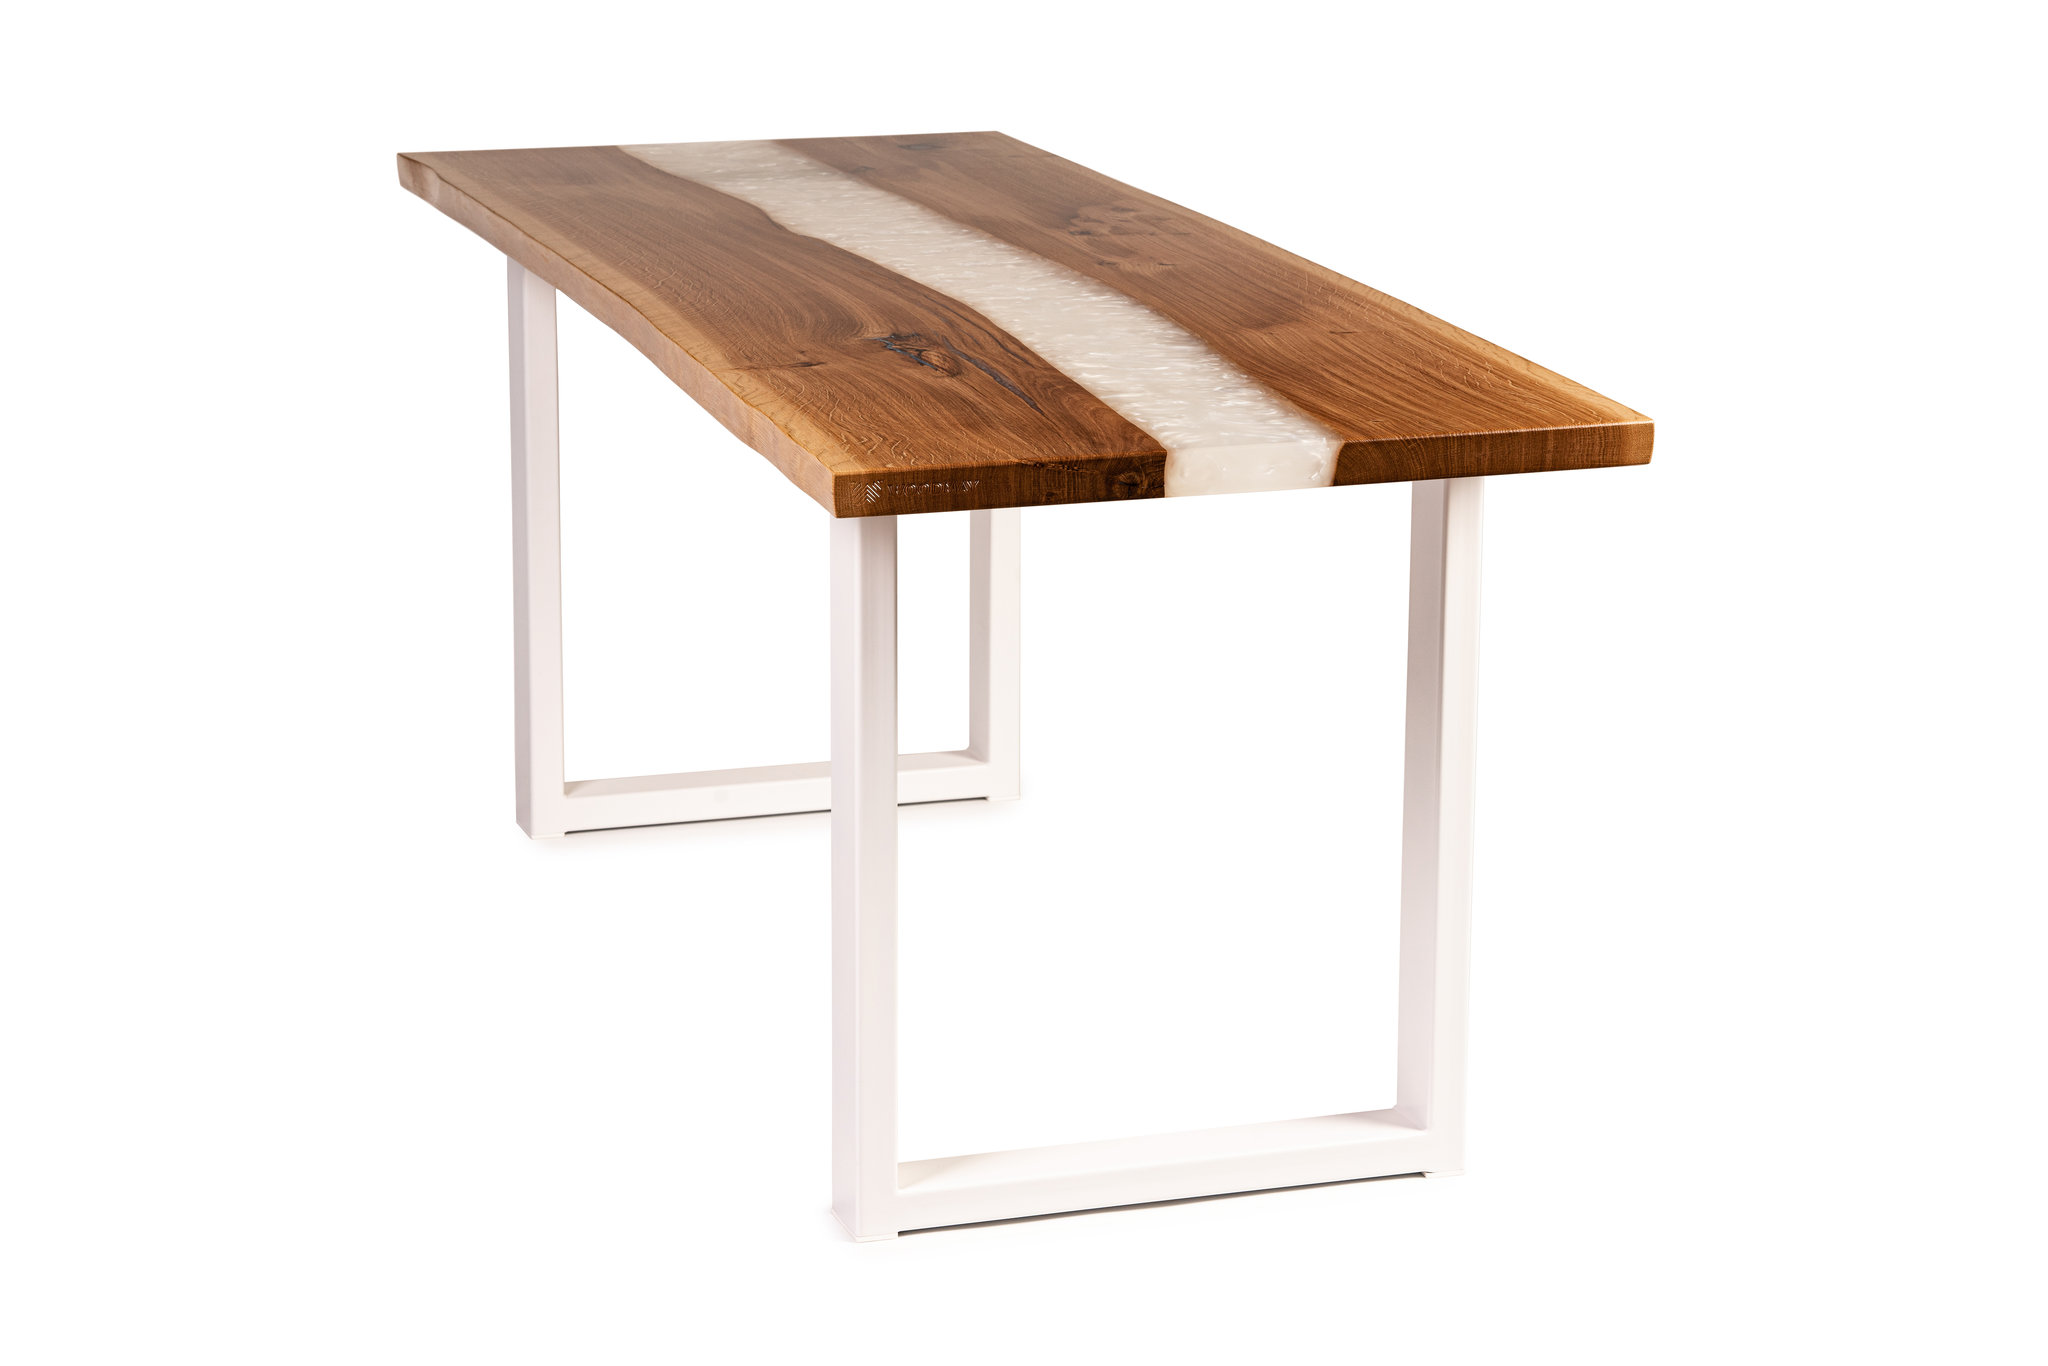 Aiolos dining table in solid oak with white epoxy resin.